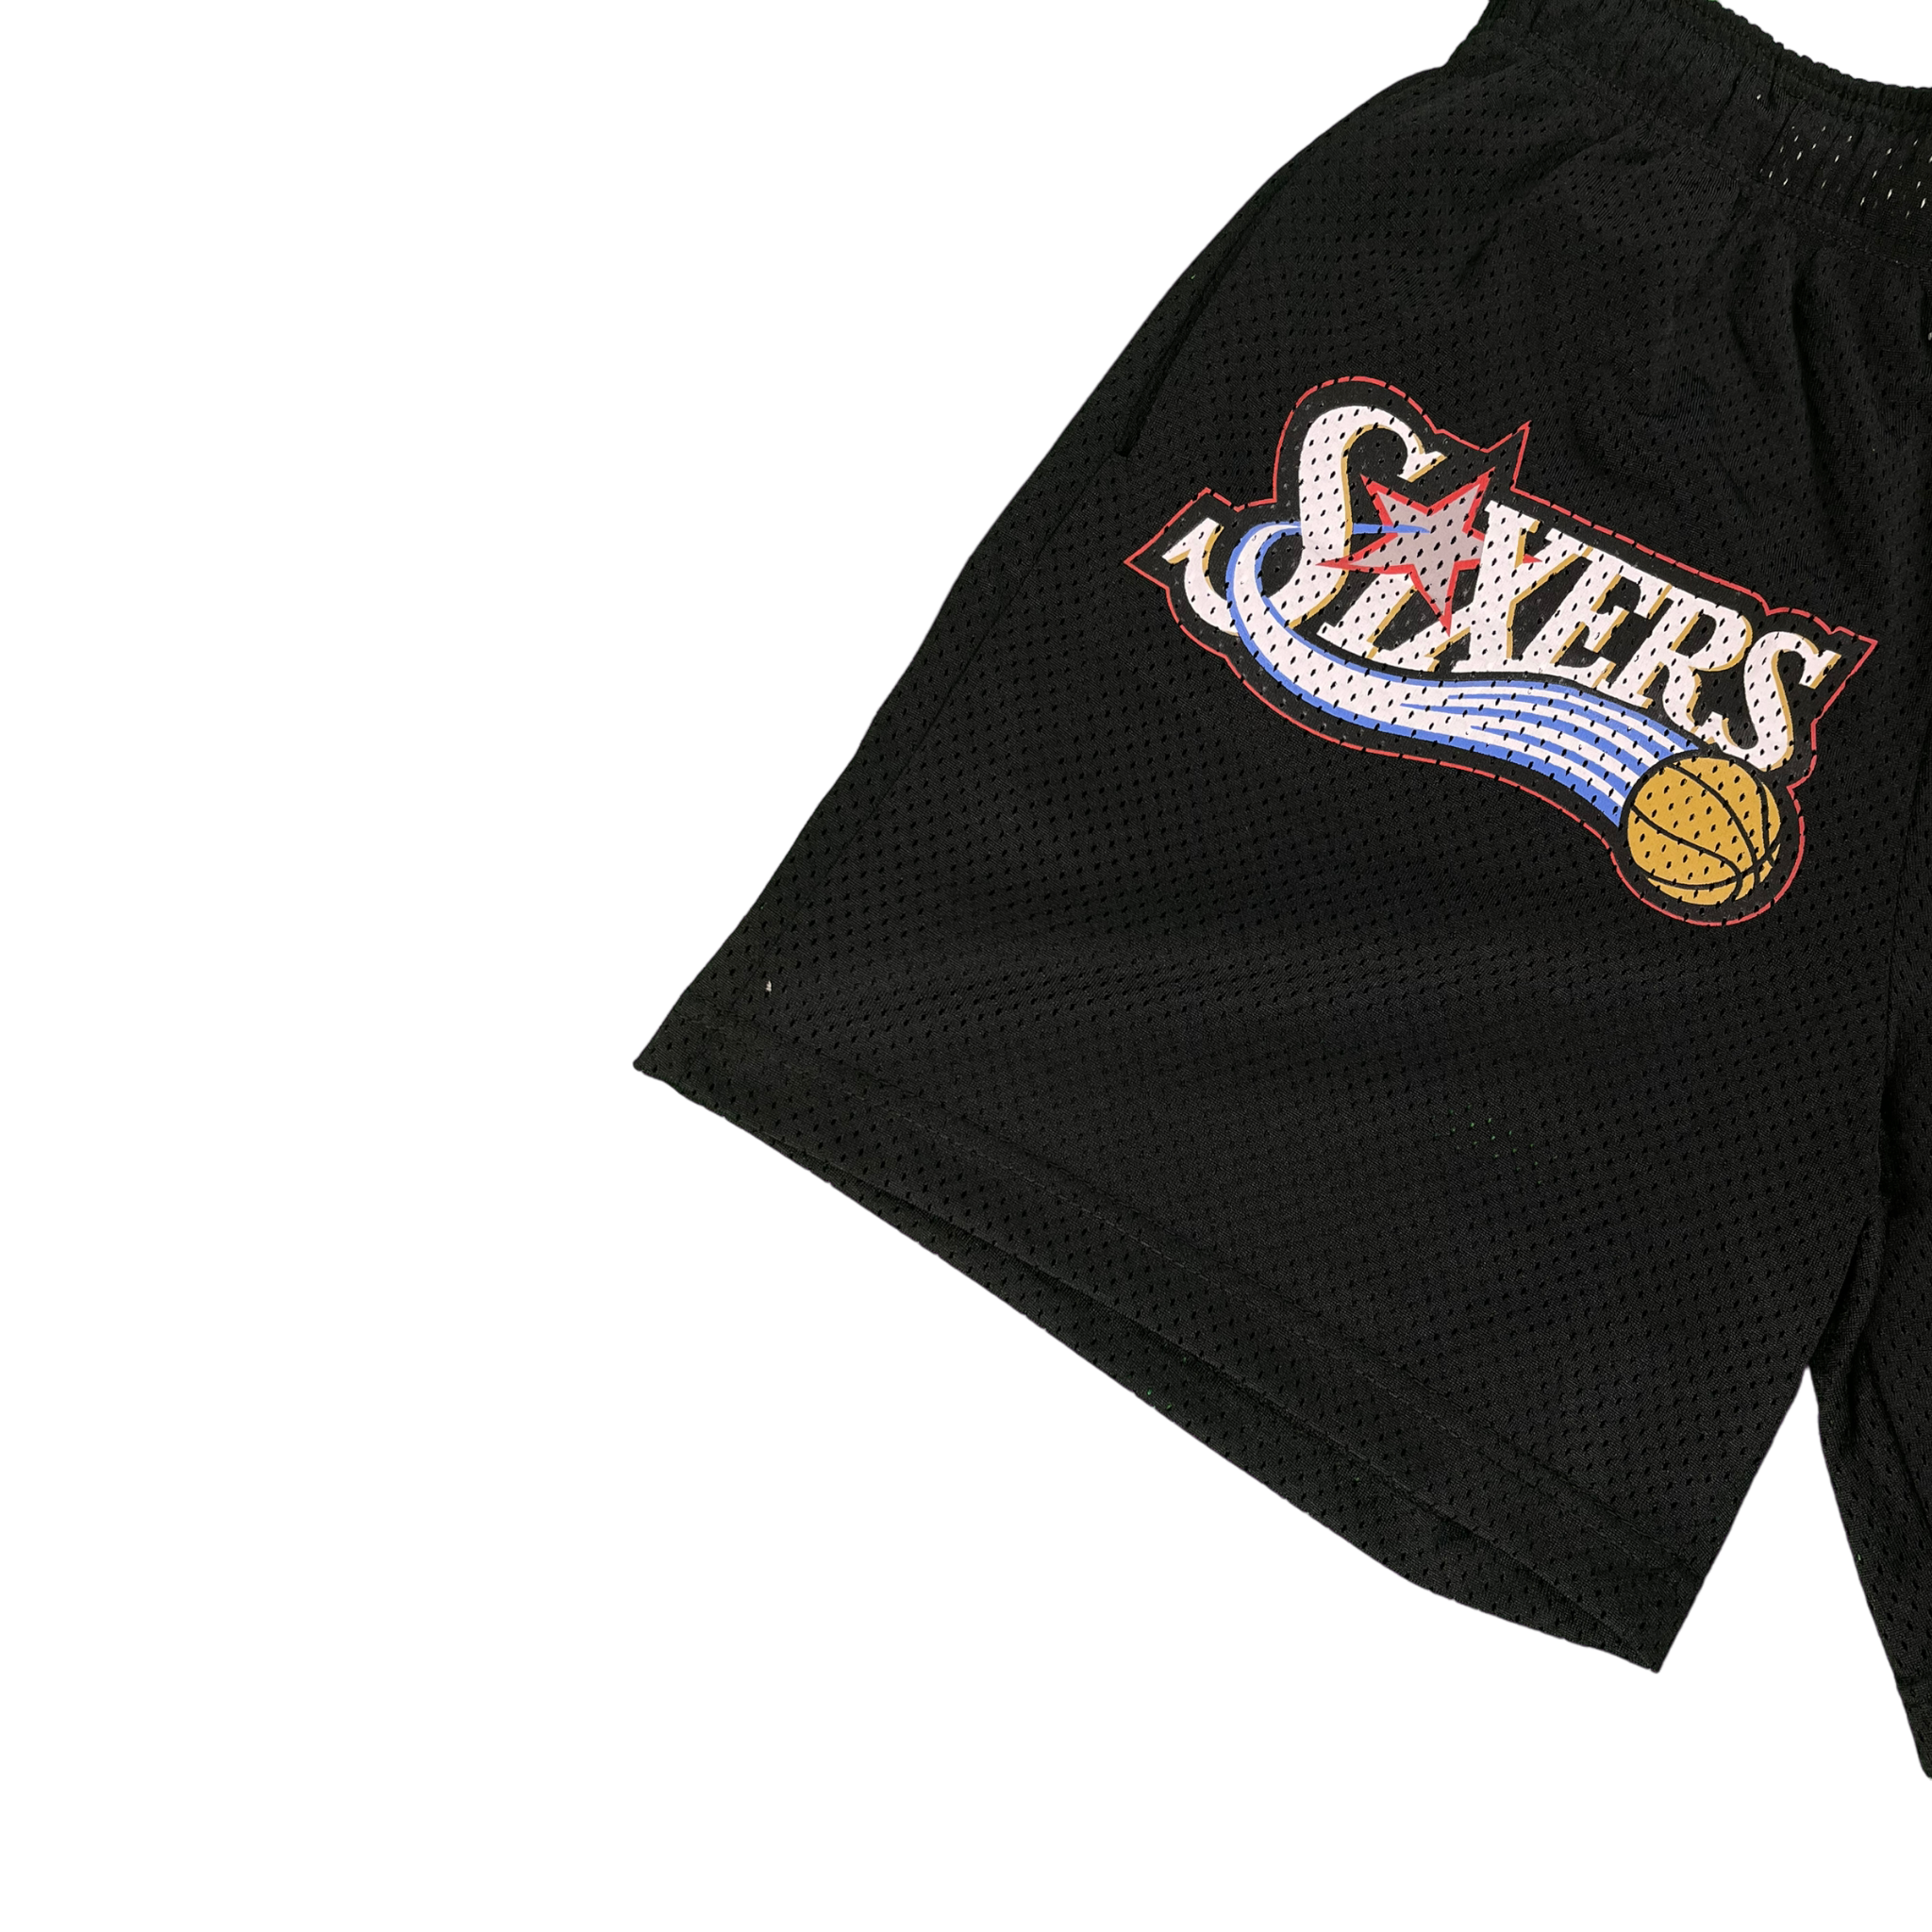 Eric Emanuel Black/Red 76 Sixer's Shorts